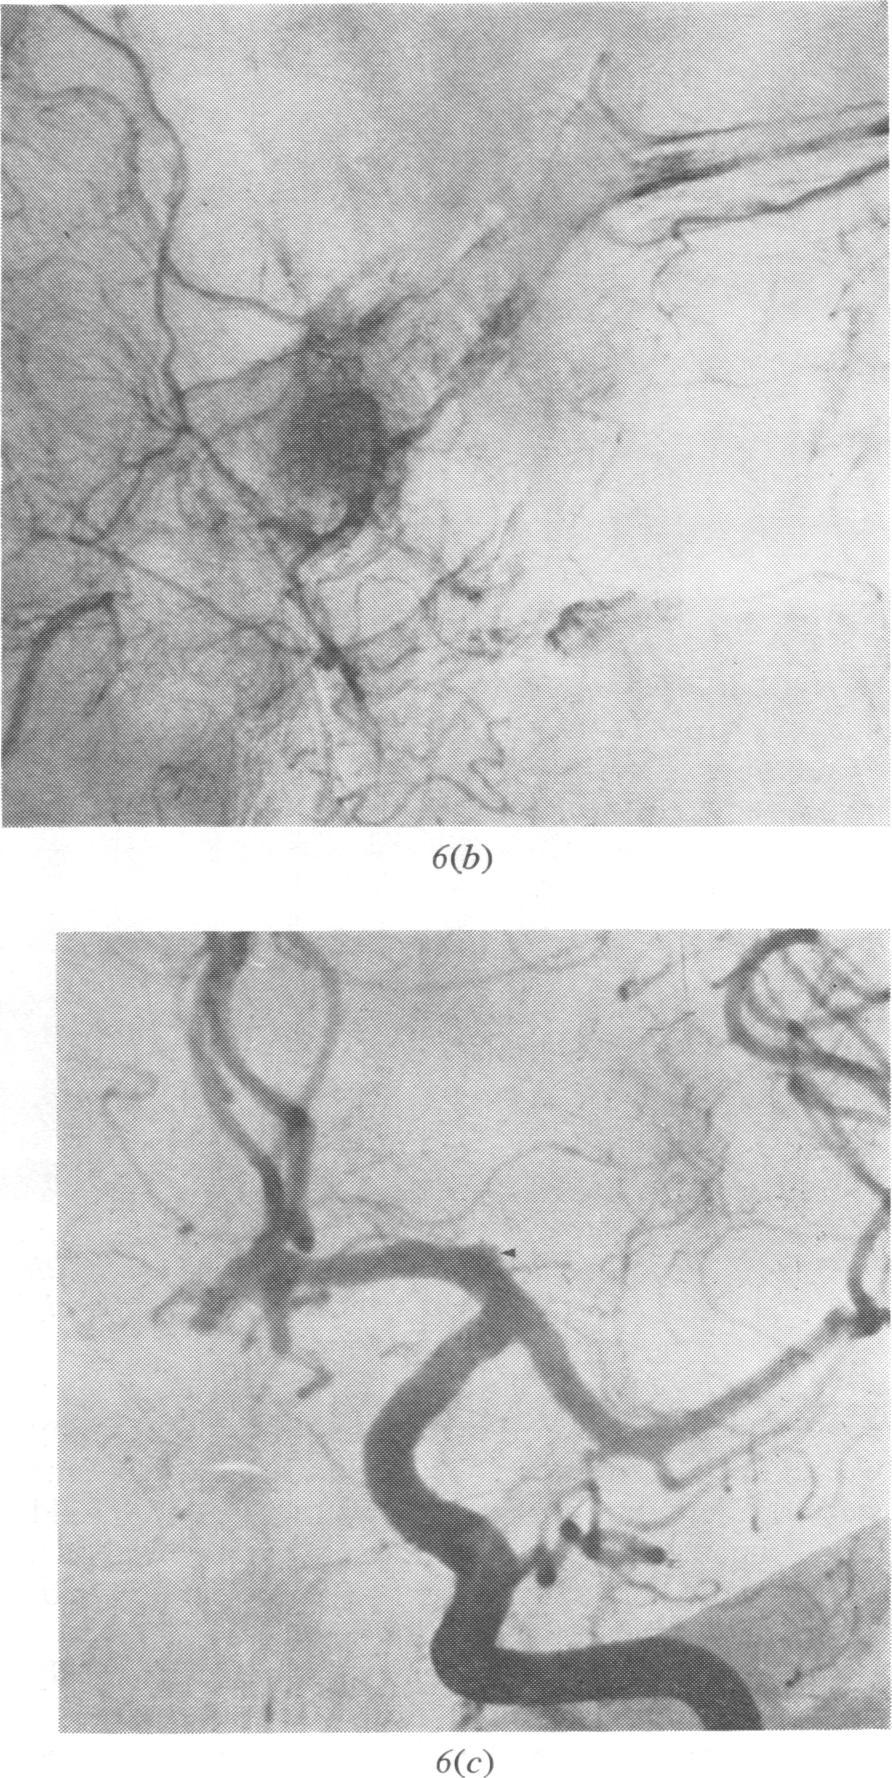 There is an unilocular aneurysm projecting superiorly and medially from the supraclinoid carotid, at the origin of the ophthalmic artery. f(i{ (a... Fig. 6 Case 6.